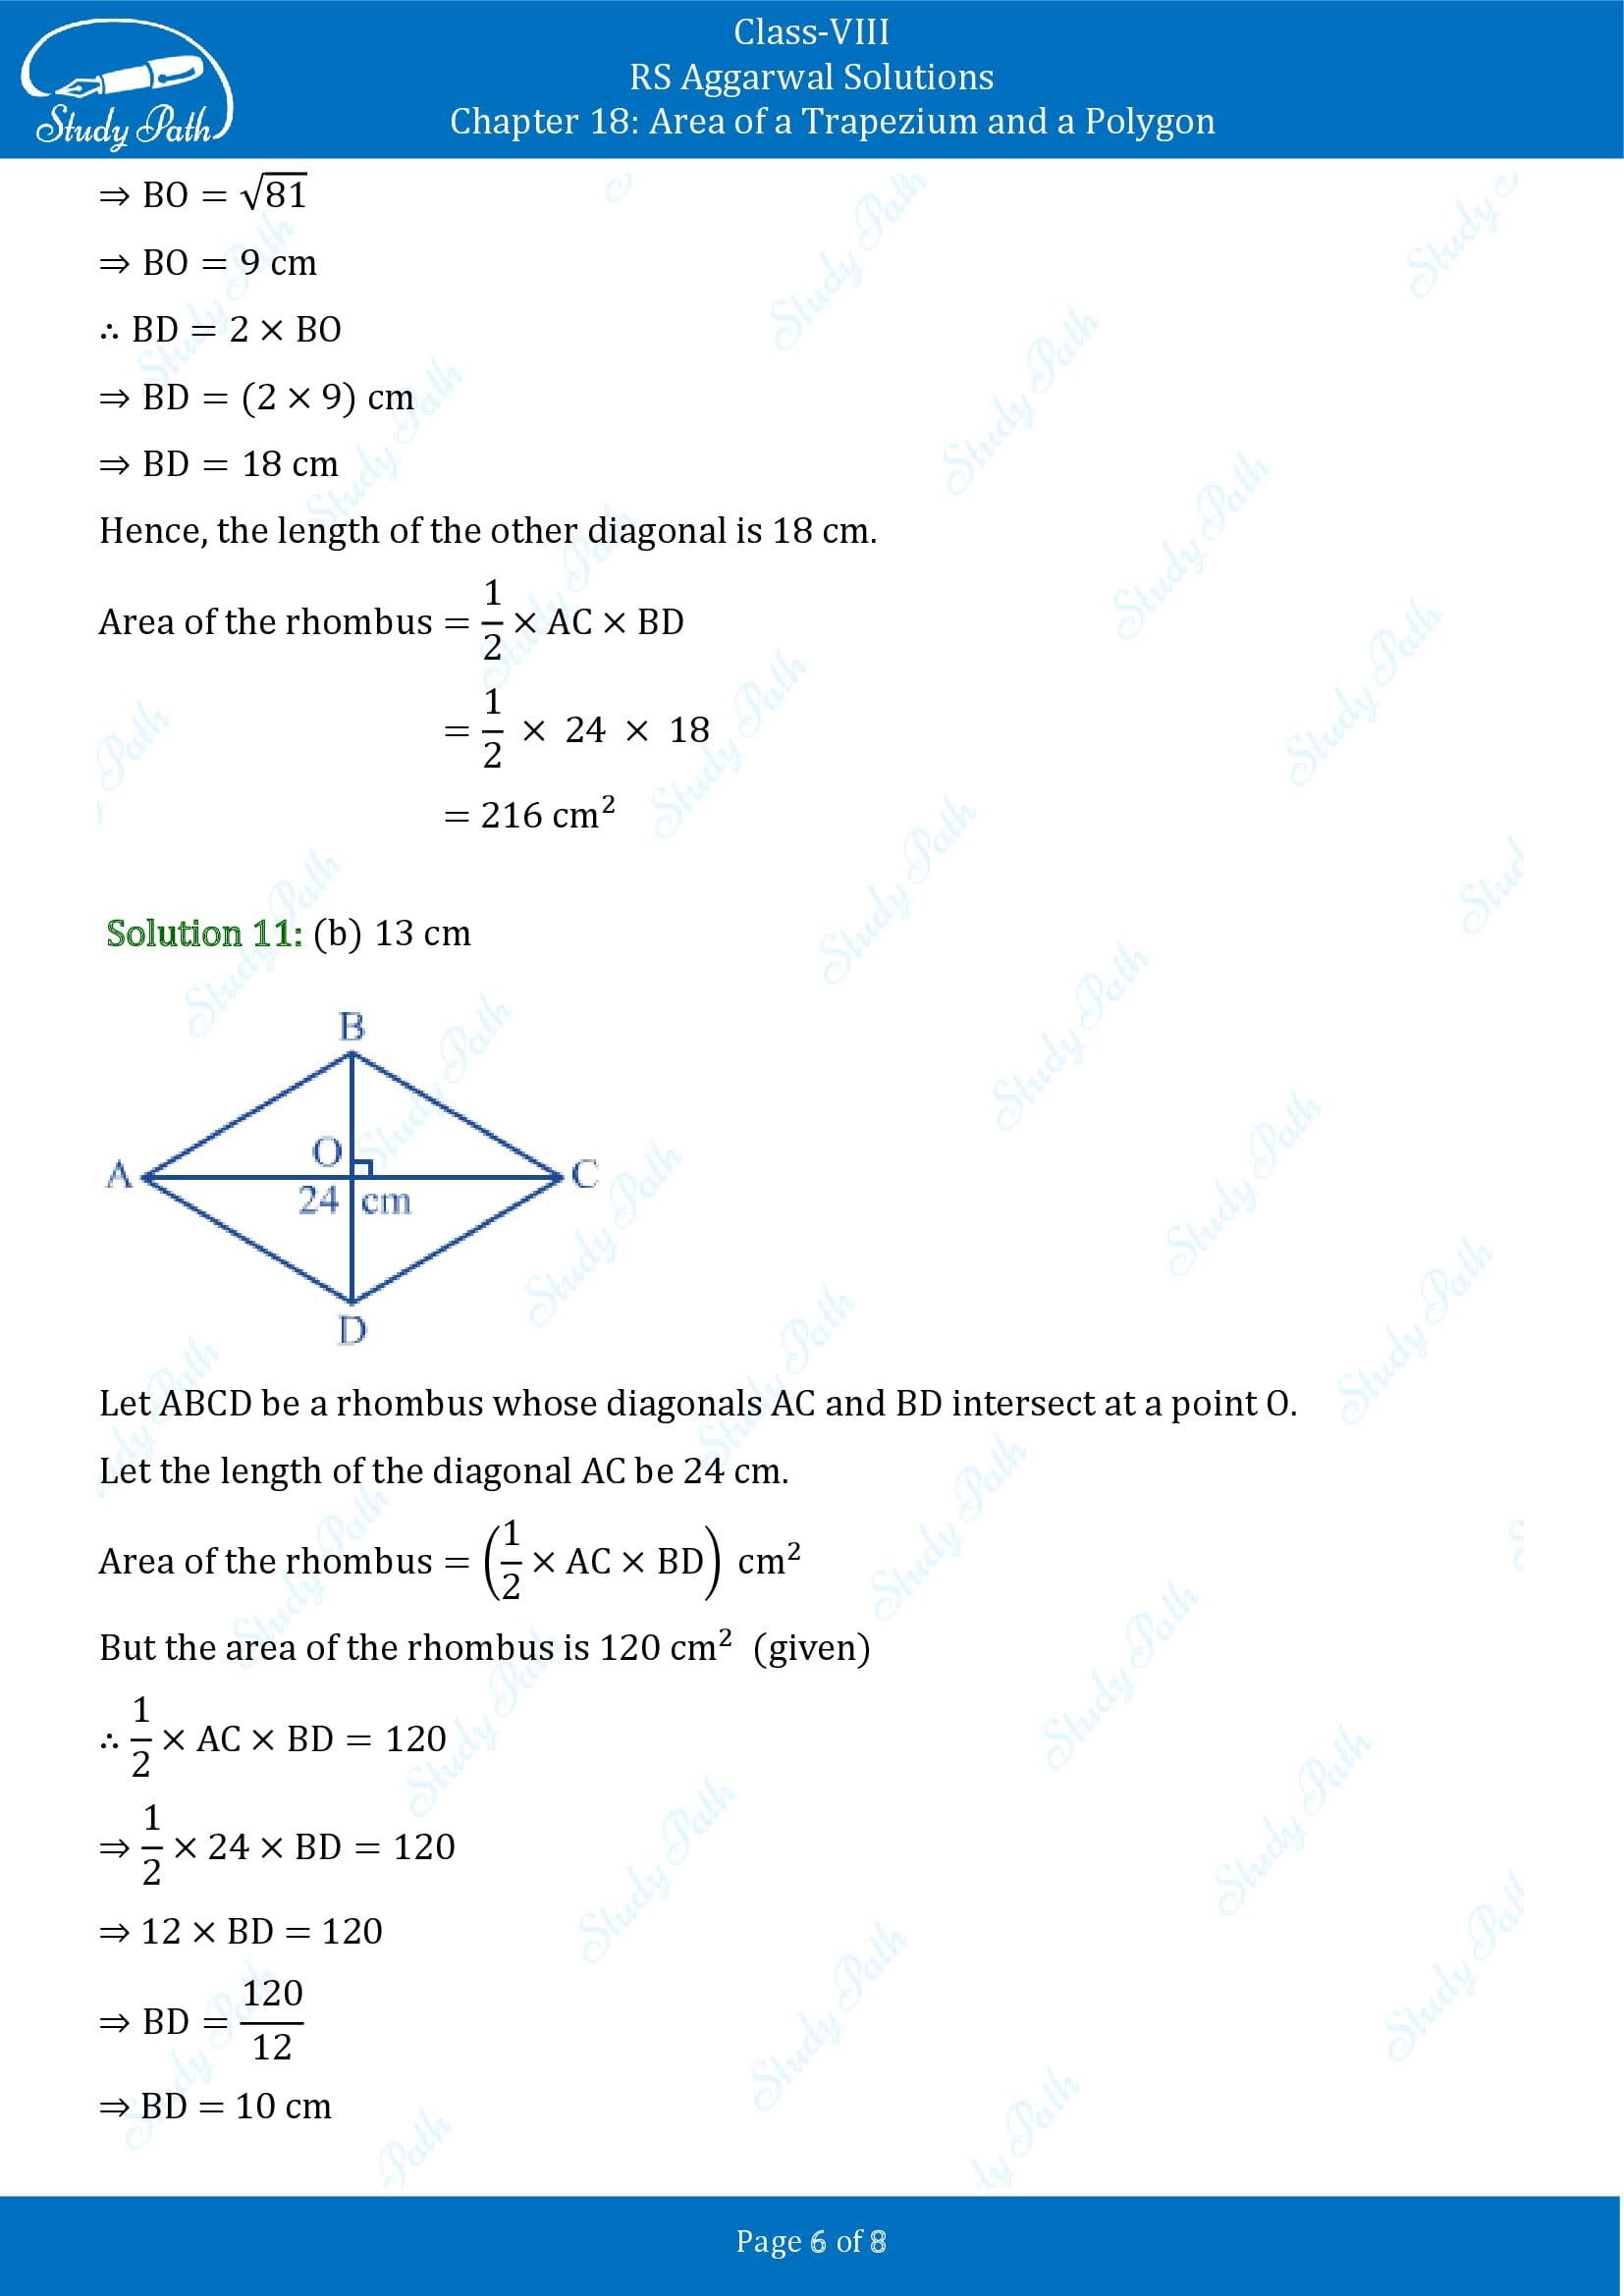 RS Aggarwal Solutions Class 8 Chapter 18 Area of a Trapezium and a Polygon Test Paper 00006